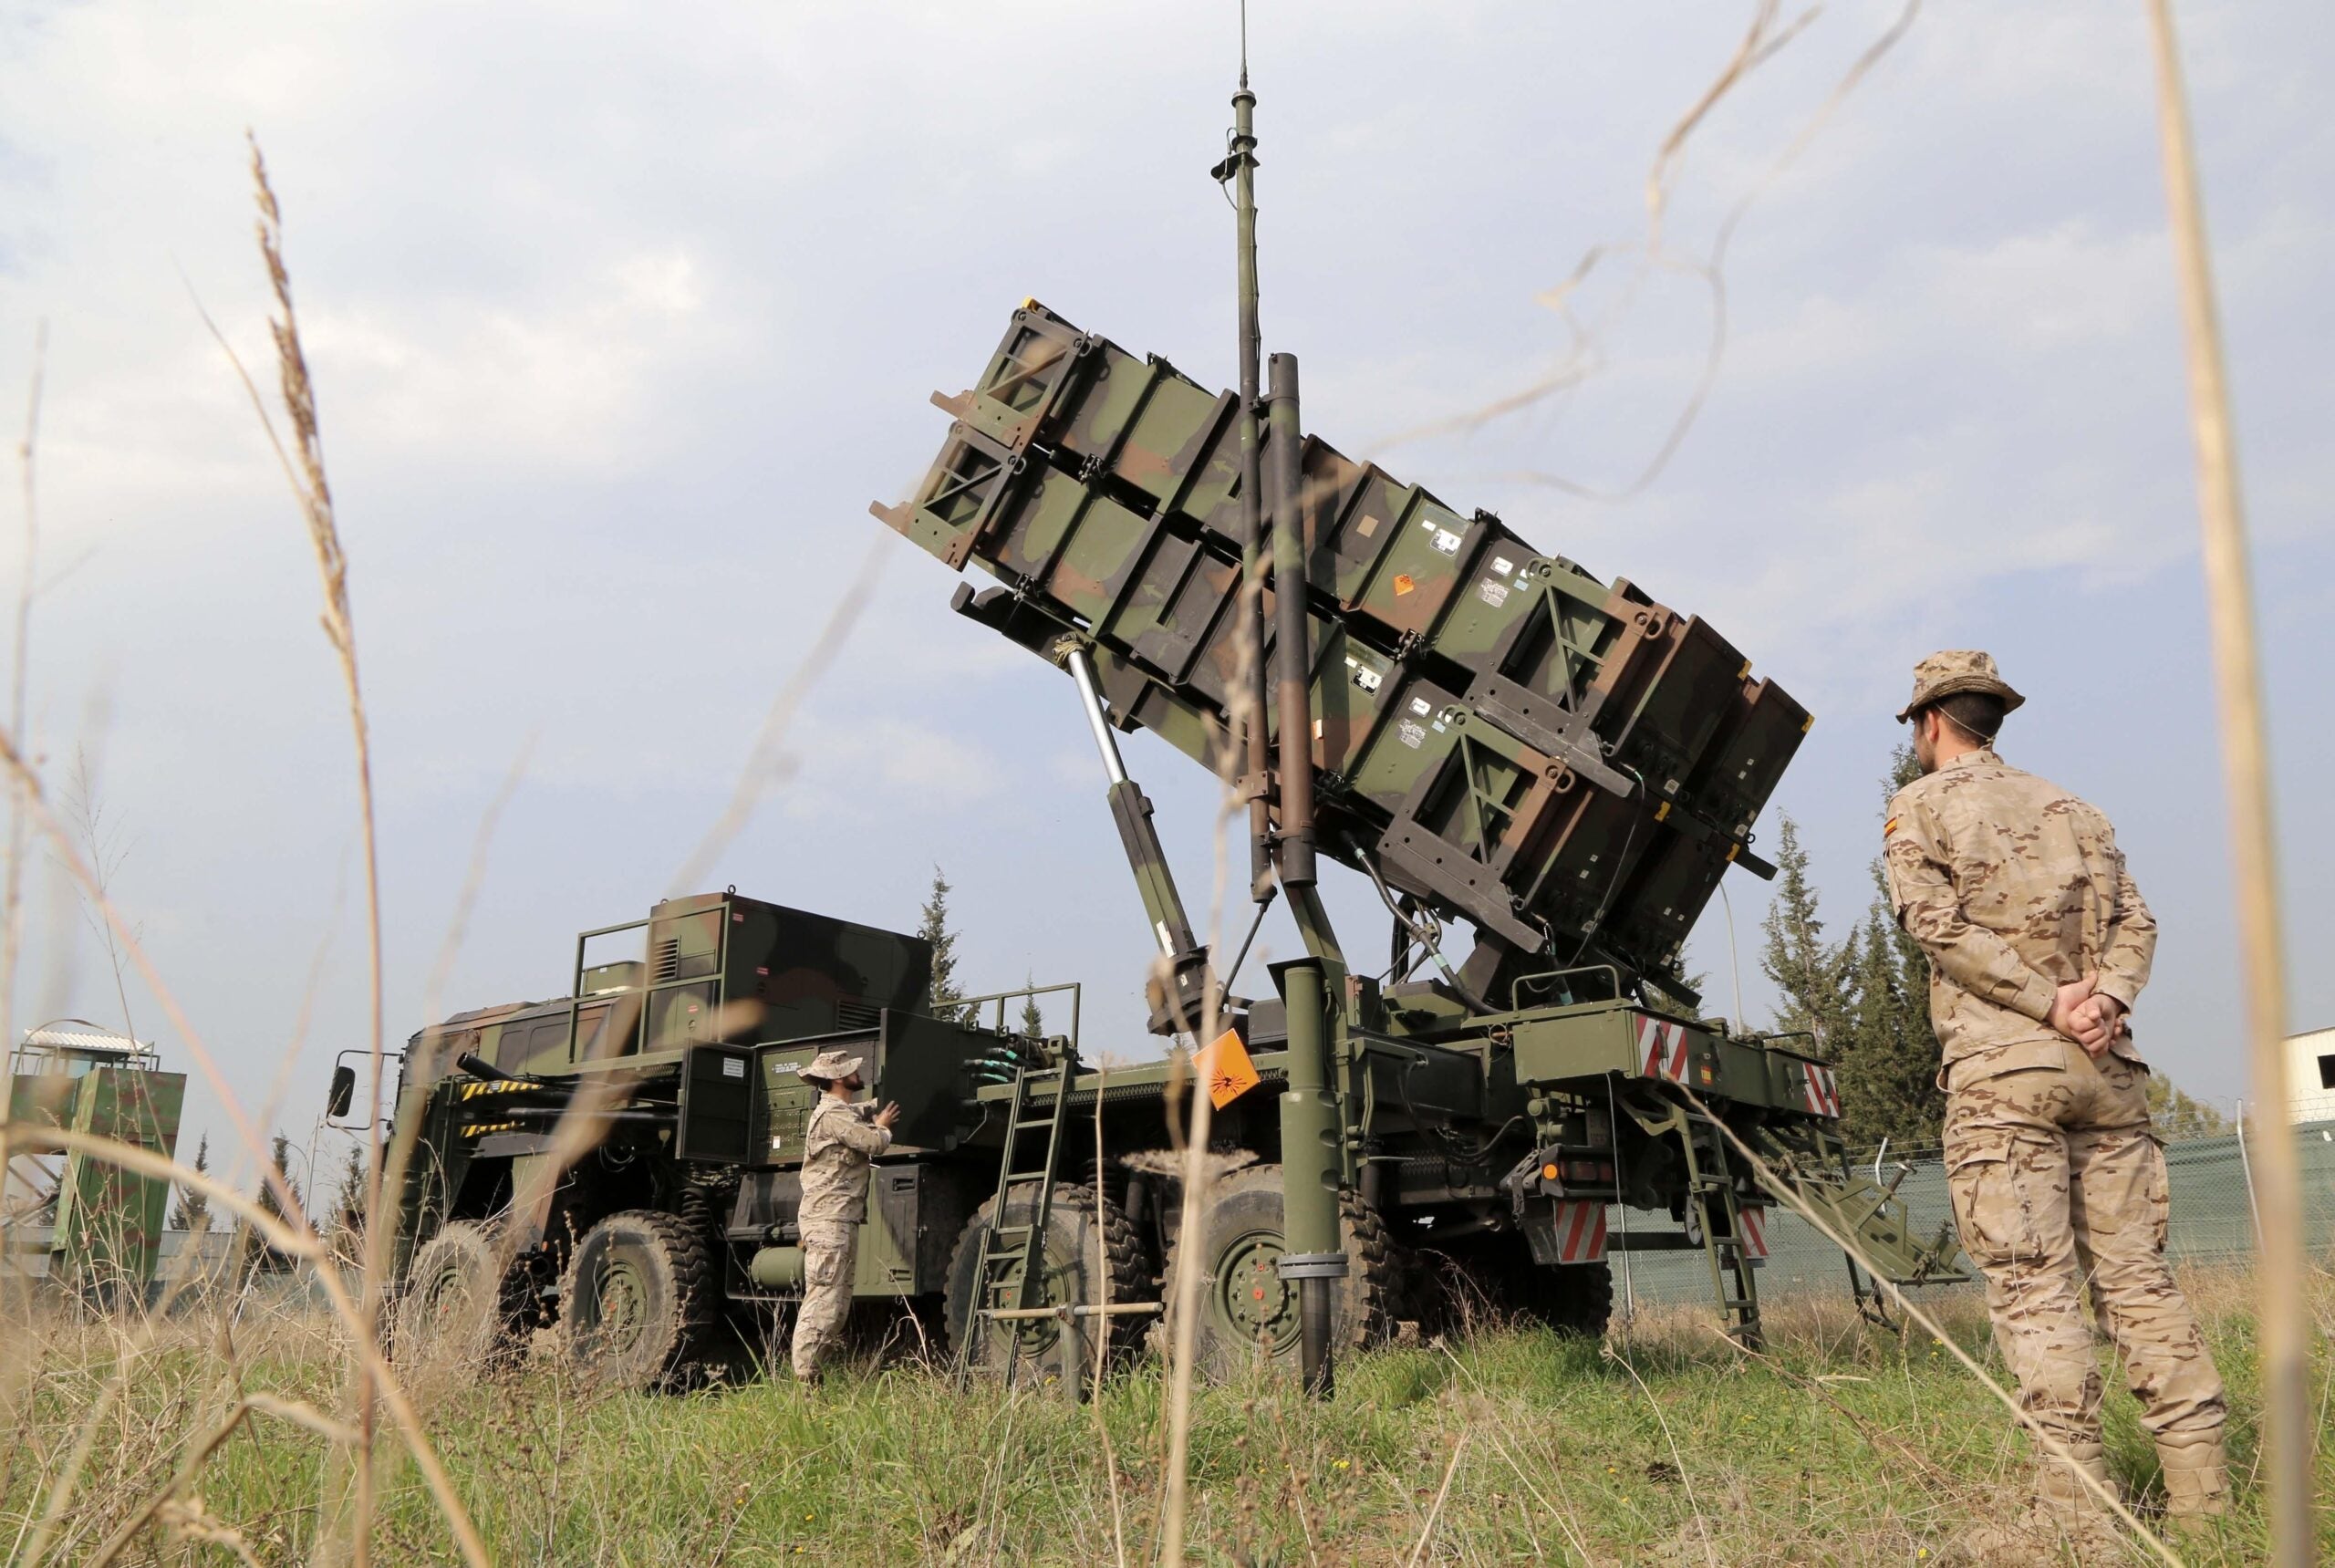 ADANA, TURKEY - JANUARY 26: Patriot missile systems Turkey requested from NATO and sent from Spain are seen after being installed in Adana, Turkey on January 26, 2015. Spain has installed the patriot unit and around 150 armed personnel at Lieutenant General Recai Engin Barracks. (Photo by Ibrahim Erikan/Anadolu Agency/Getty Images)